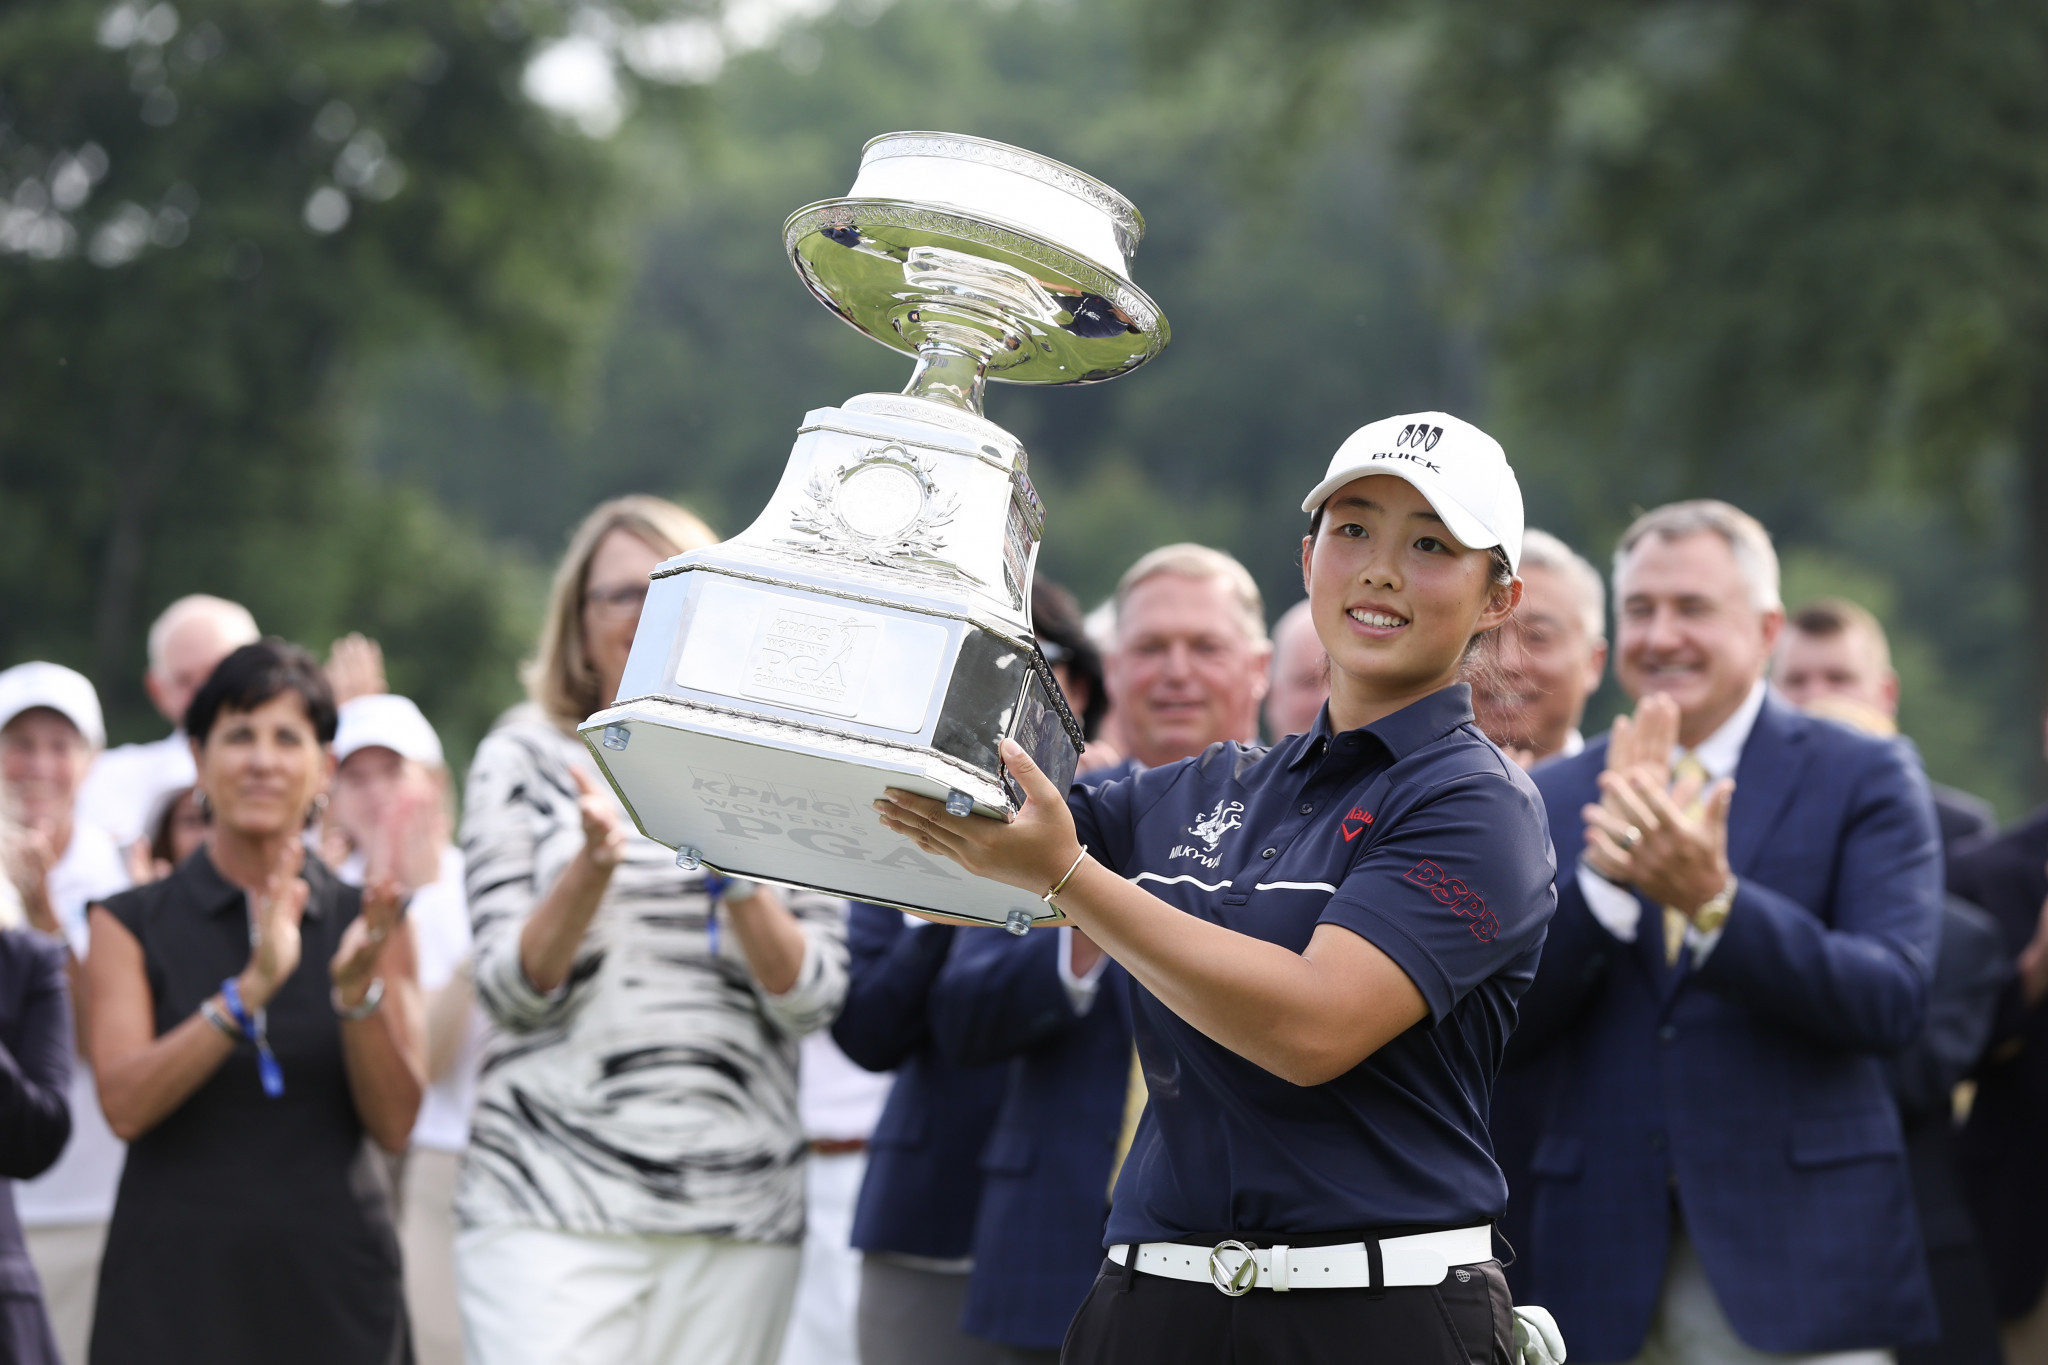 Yin birdies final hole to clinch first major at Women’s PGA Championship